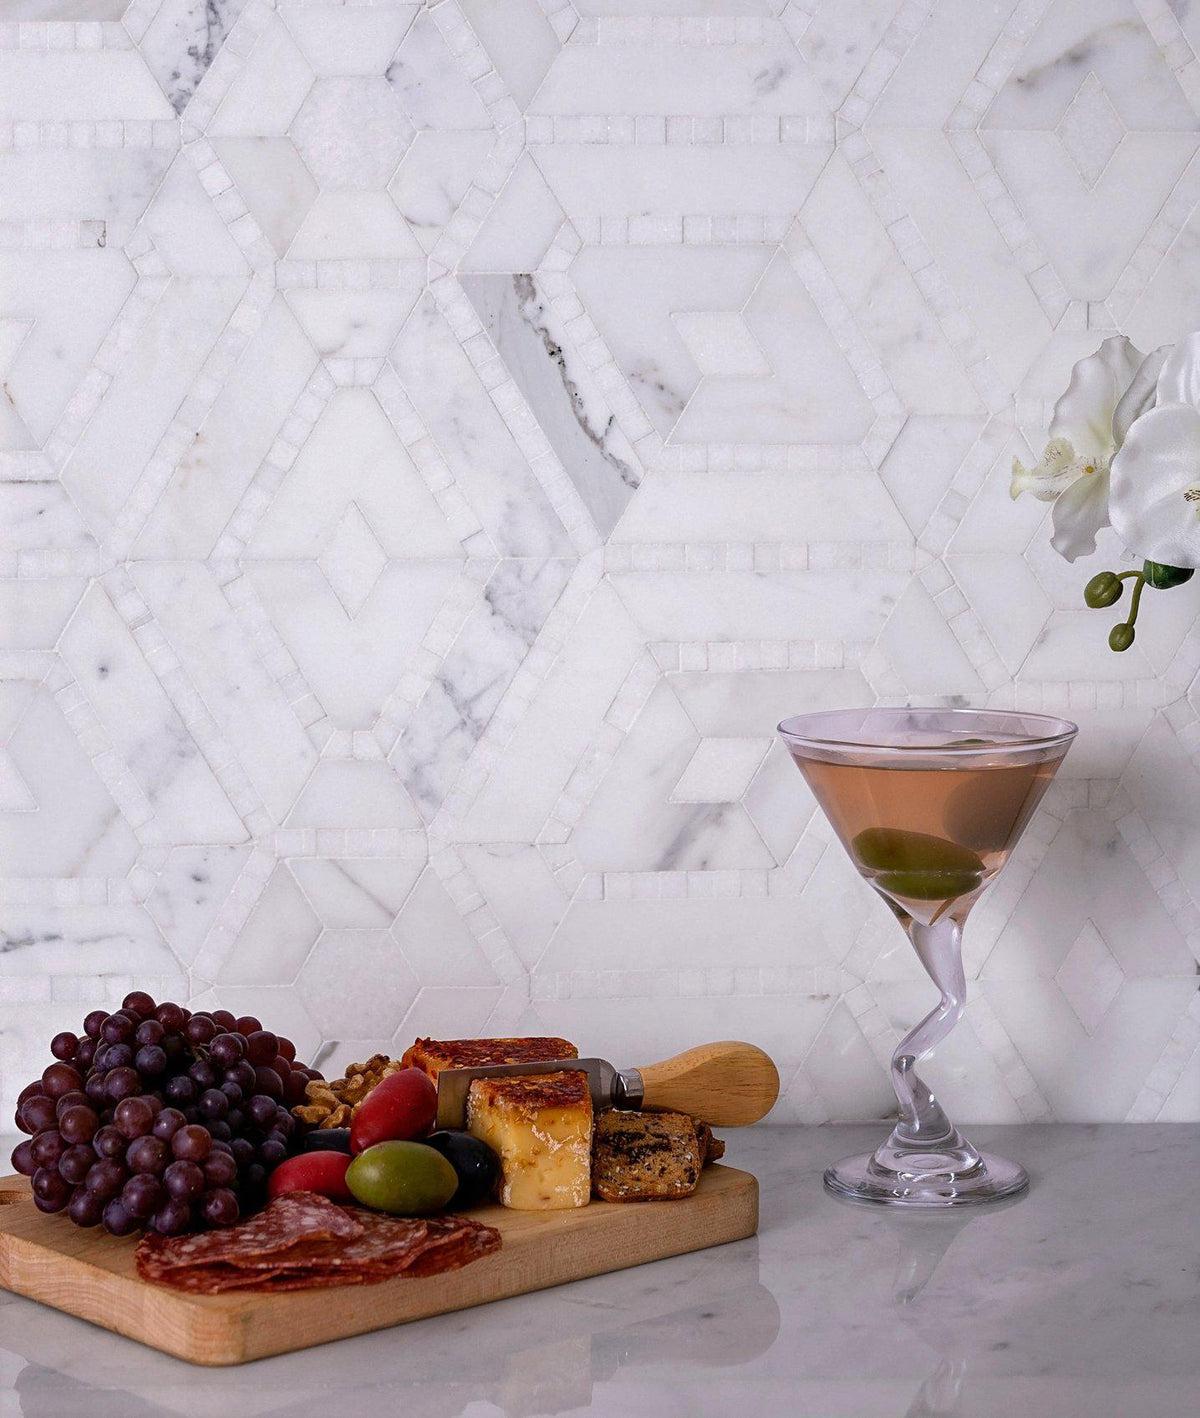 Diamond & Hex Calacatta Gold Marble Mosaic Tile in the Kitchen